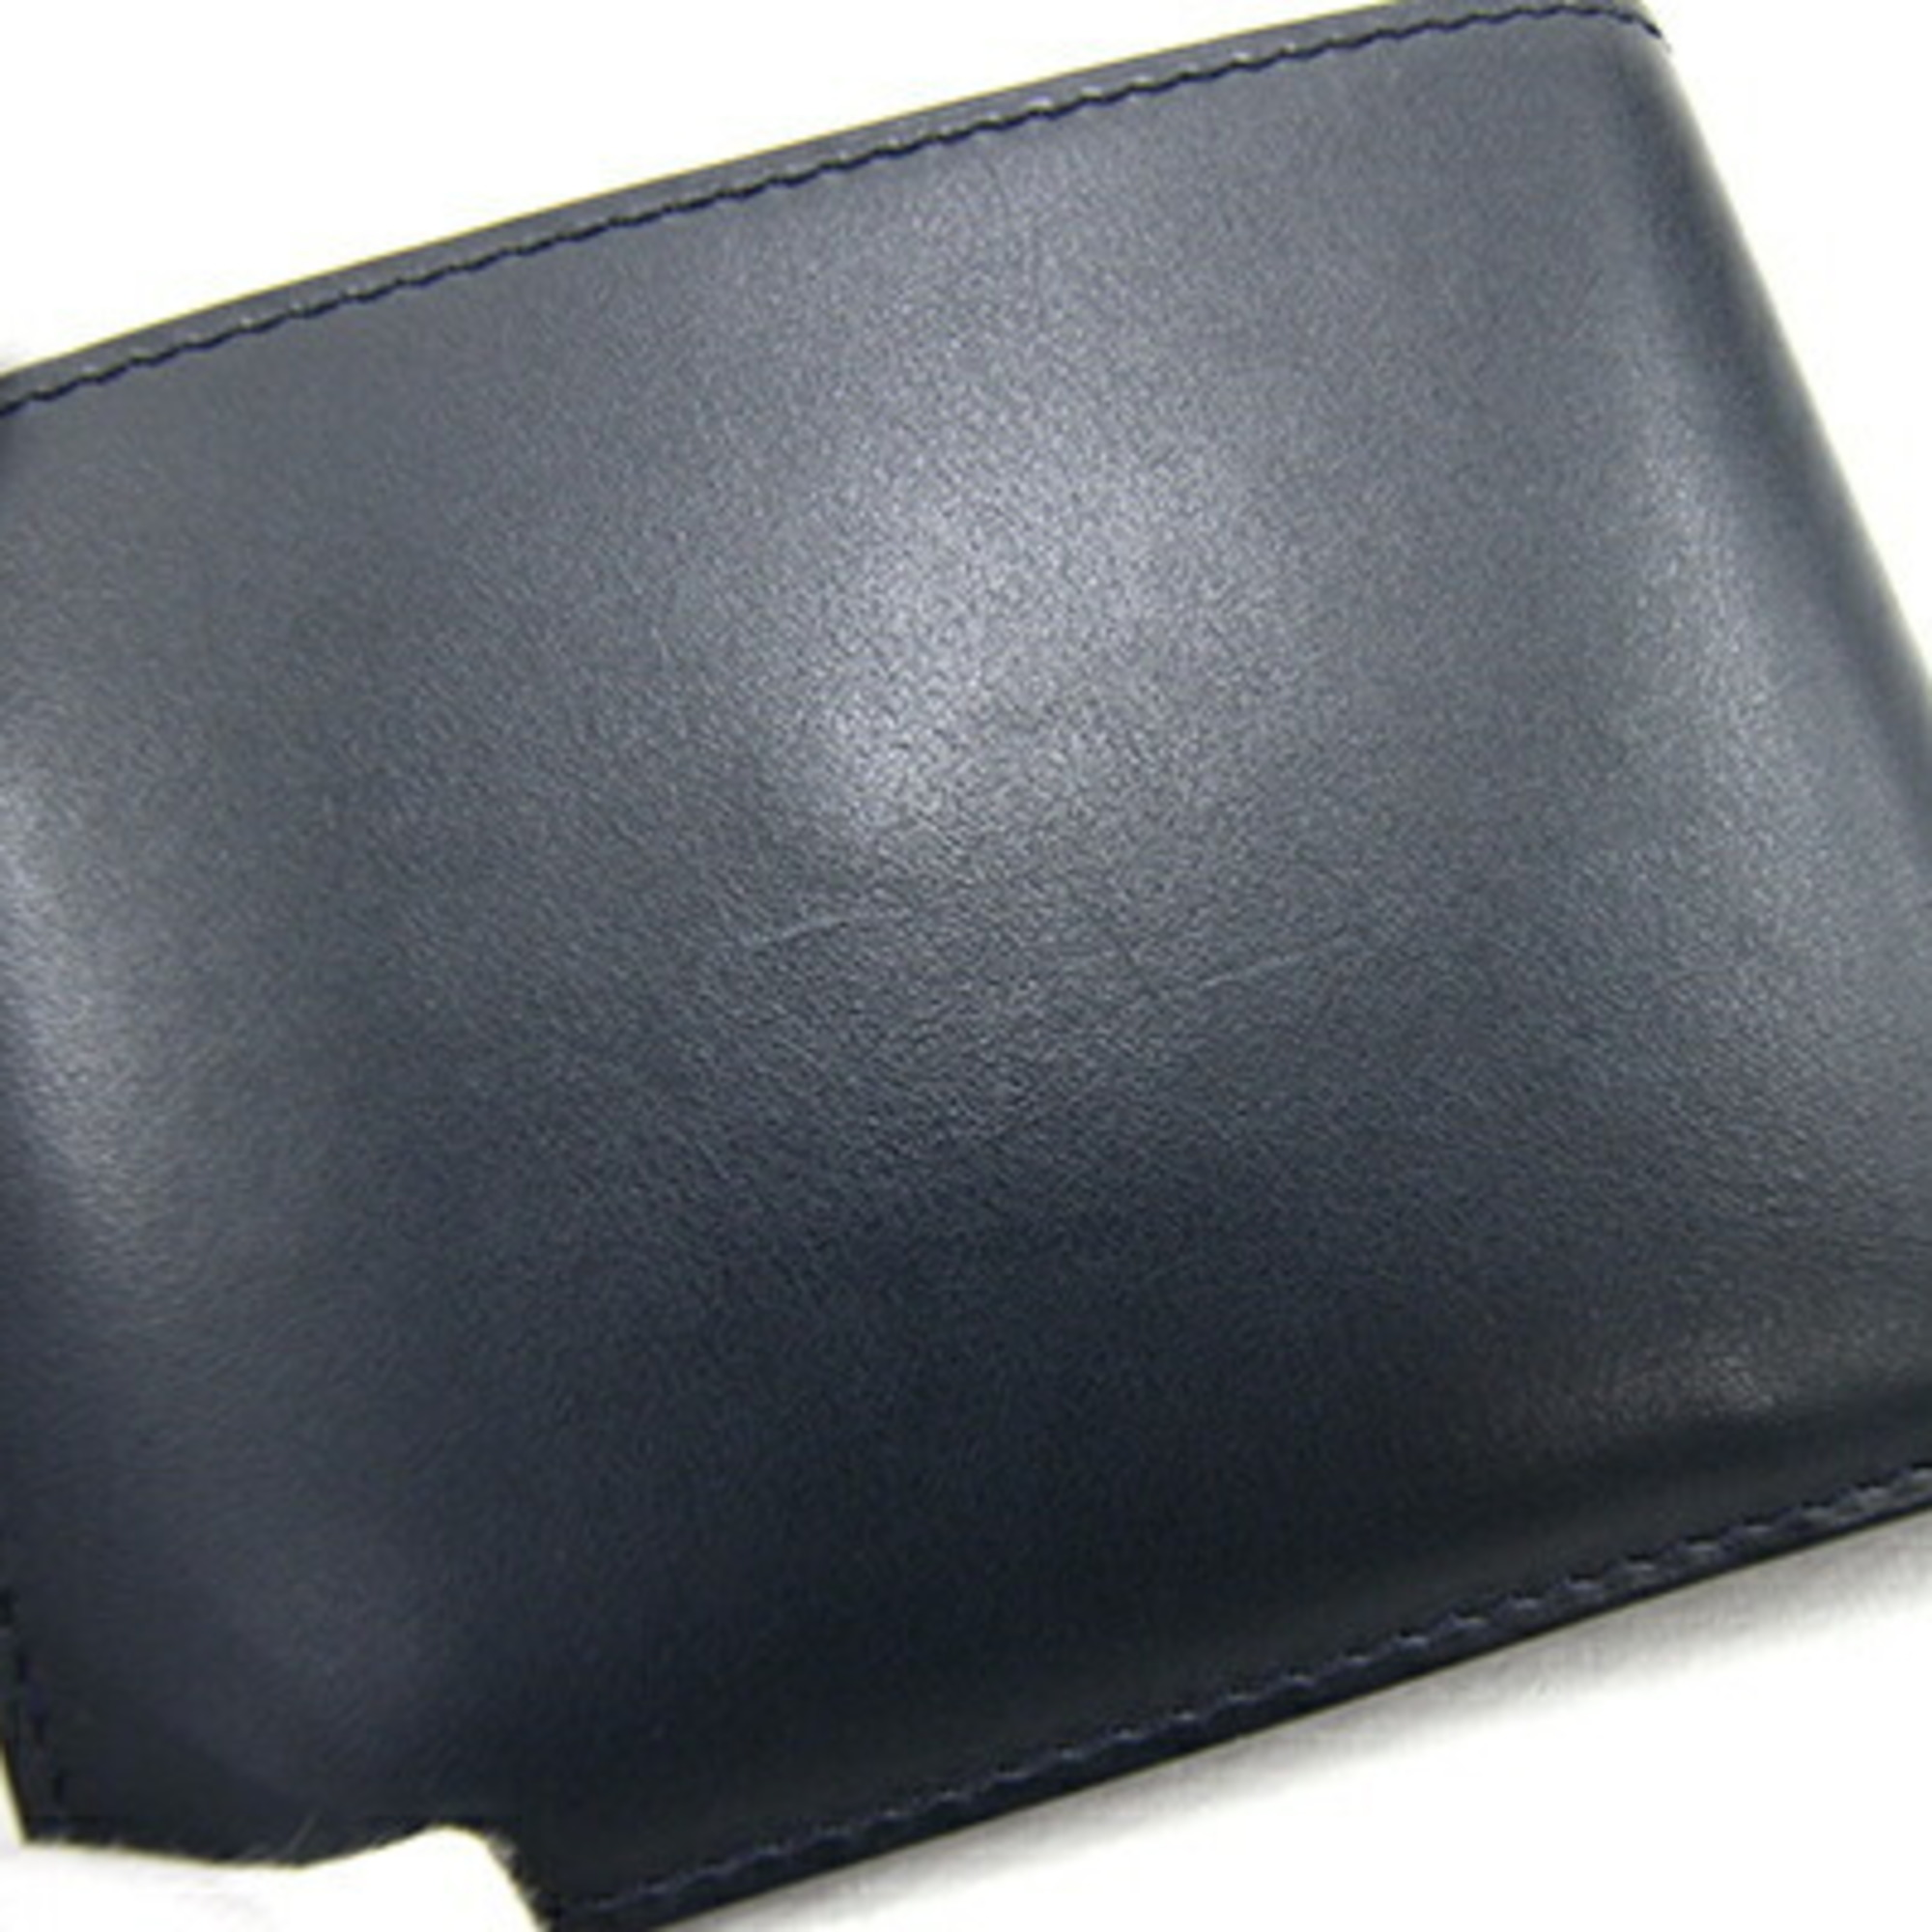 Dunhill Bifold Wallet 18F2320 Dark Navy Leather Compact Black Men's All